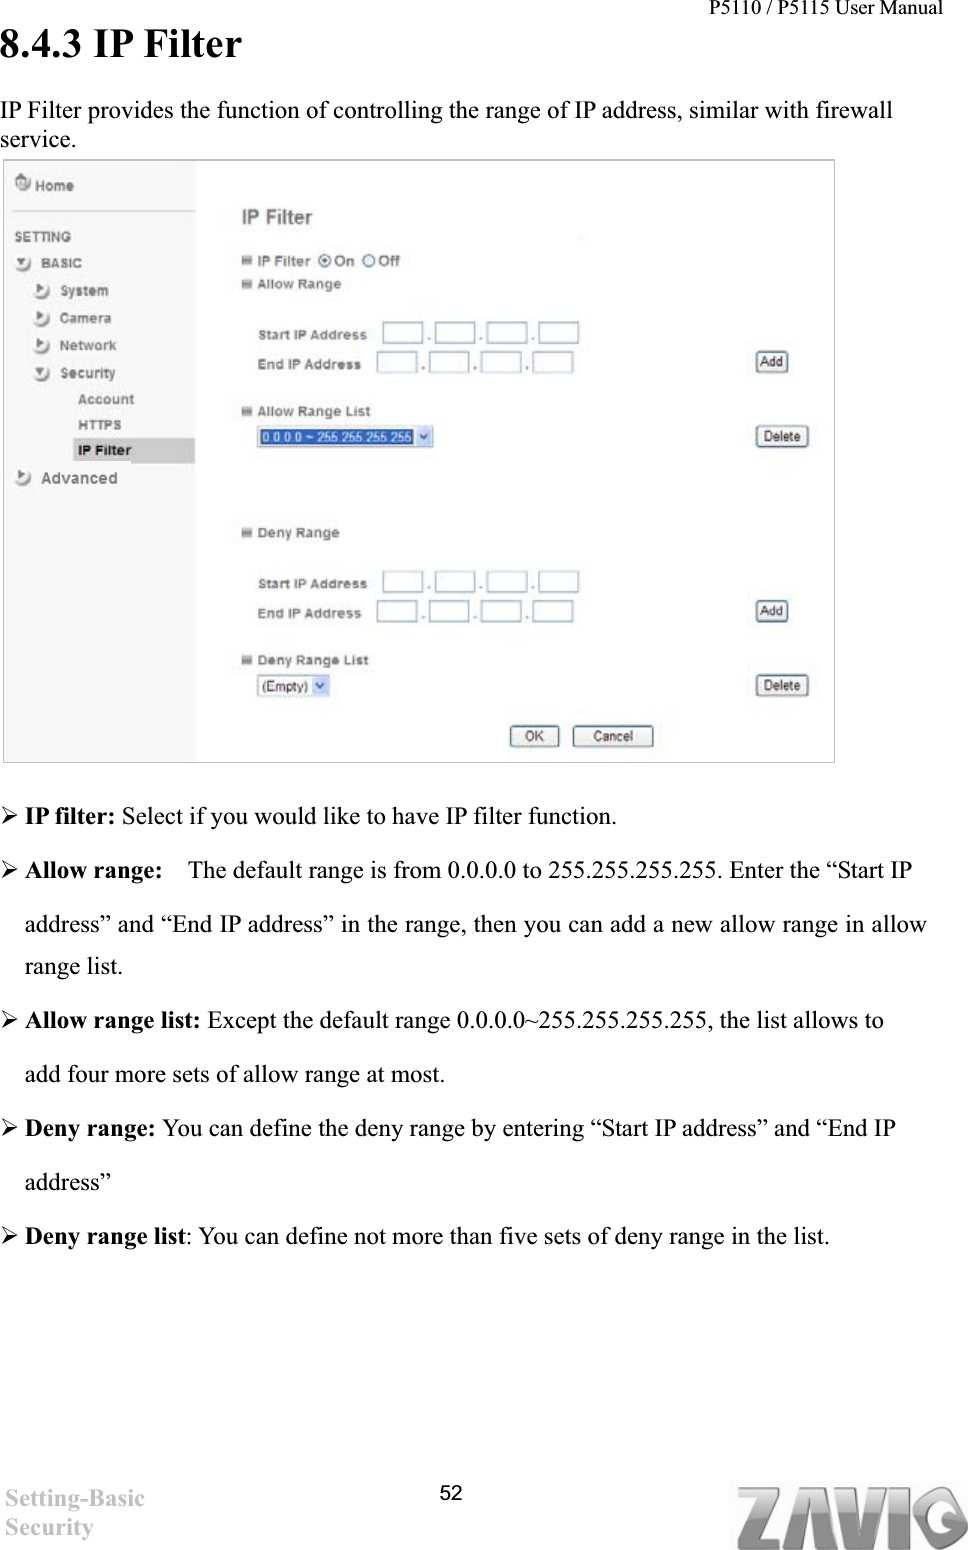 P5110 / P5115 User Manual   528.4.3 IP Filter IP Filter provides the function of controlling the range of IP address, similar with firewall service.¾IP filter: Select if you would like to have IP filter function.   ¾Allow range:    The default range is from 0.0.0.0 to 255.255.255.255. Enter the “Start IP   address” and “End IP address” in the range, then you can add a new allow range in allow range list.   ¾Allow range list: Except the default range 0.0.0.0~255.255.255.255, the list allows to add four more sets of allow range at most. ¾Deny range: You can define the deny range by entering “Start IP address” and “End IP address”¾Deny range list: You can define not more than five sets of deny range in the list.   Setting-Basic Security